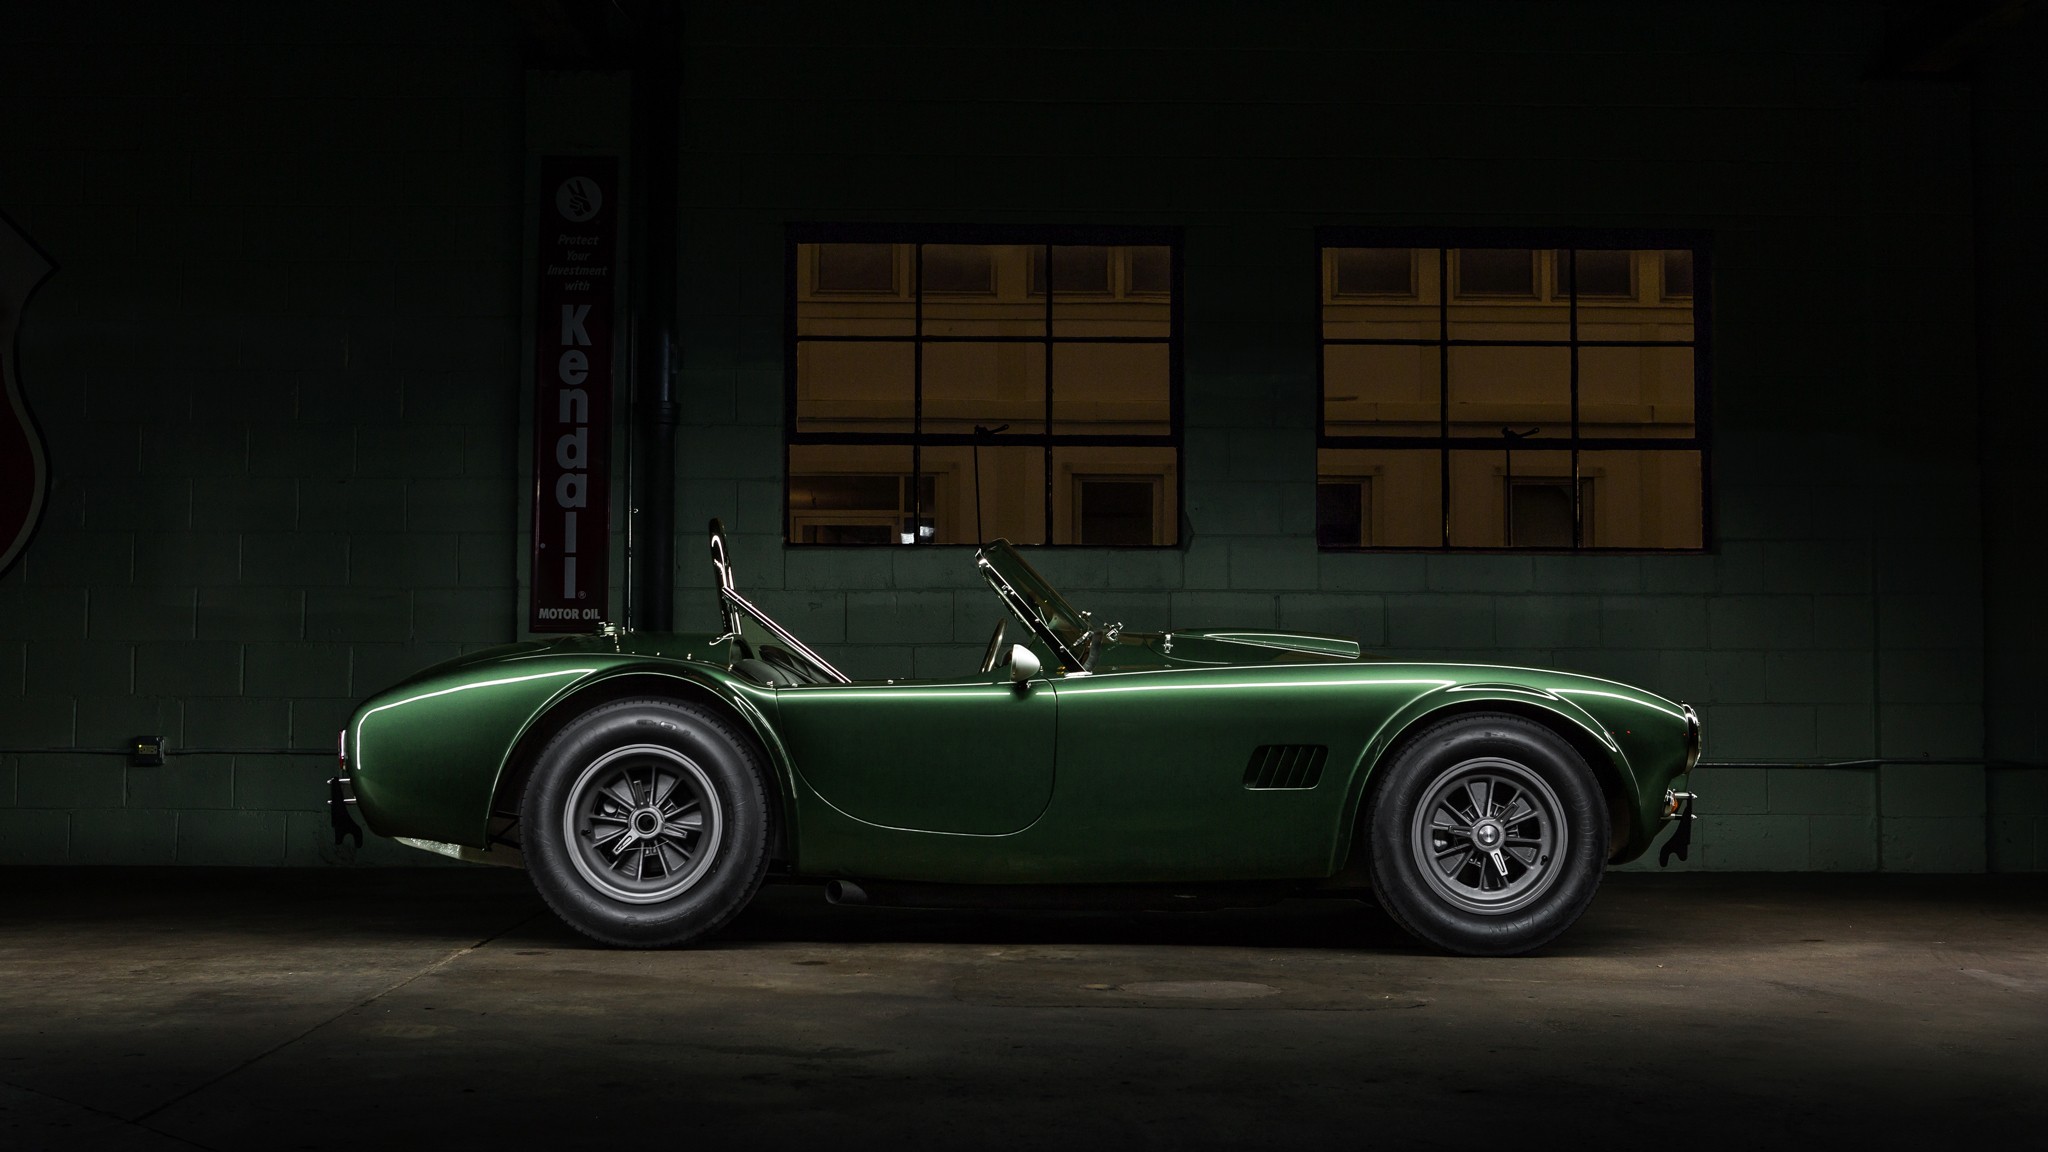 Green Shelby Cobra side view.